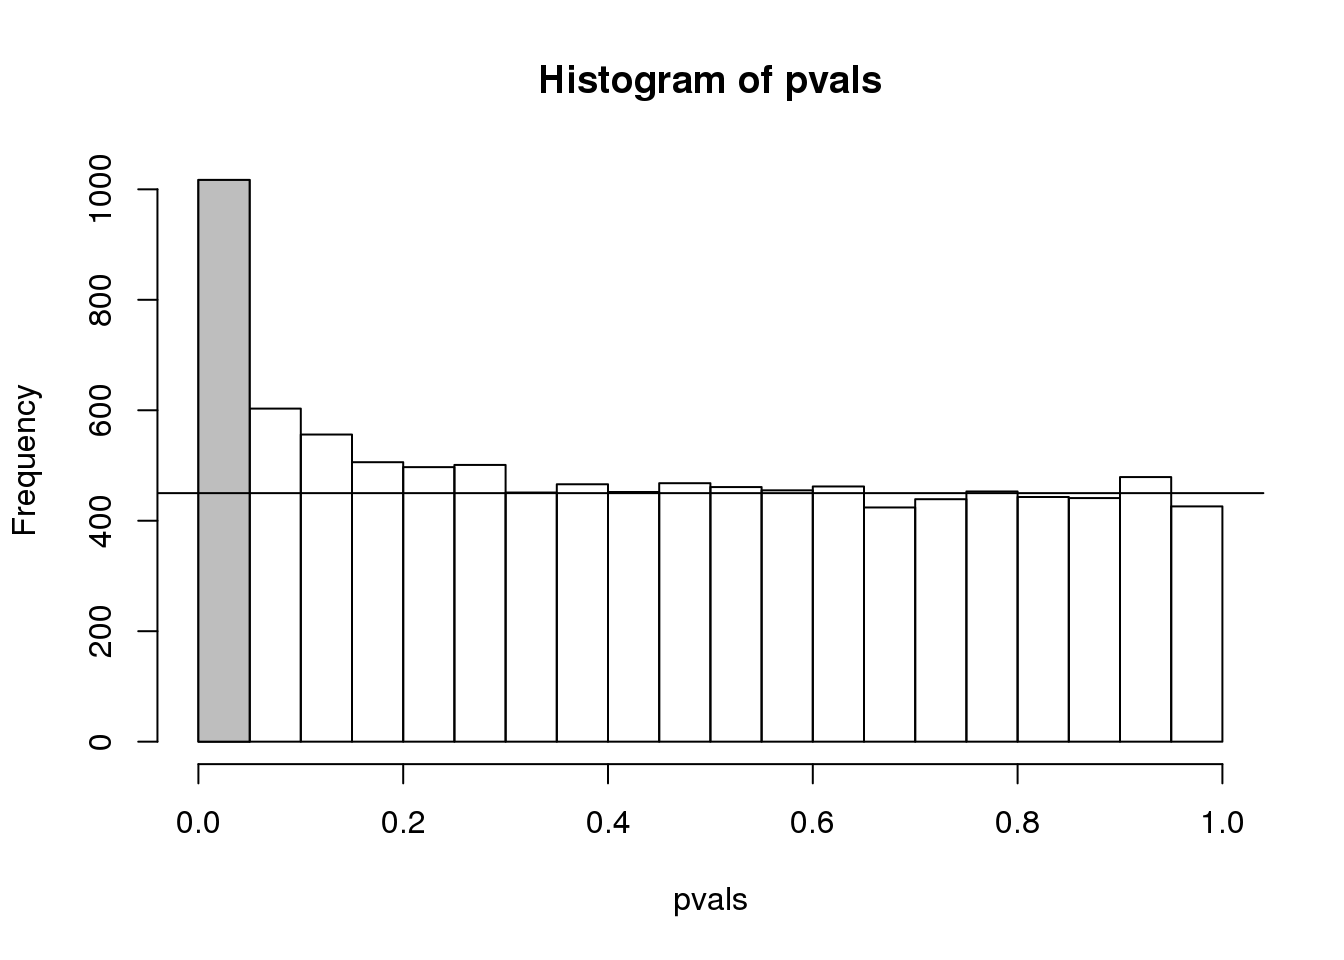 Histogram of p-values. Monte Carlo simulation was used to generate data with m_1 genes having differences between groups.